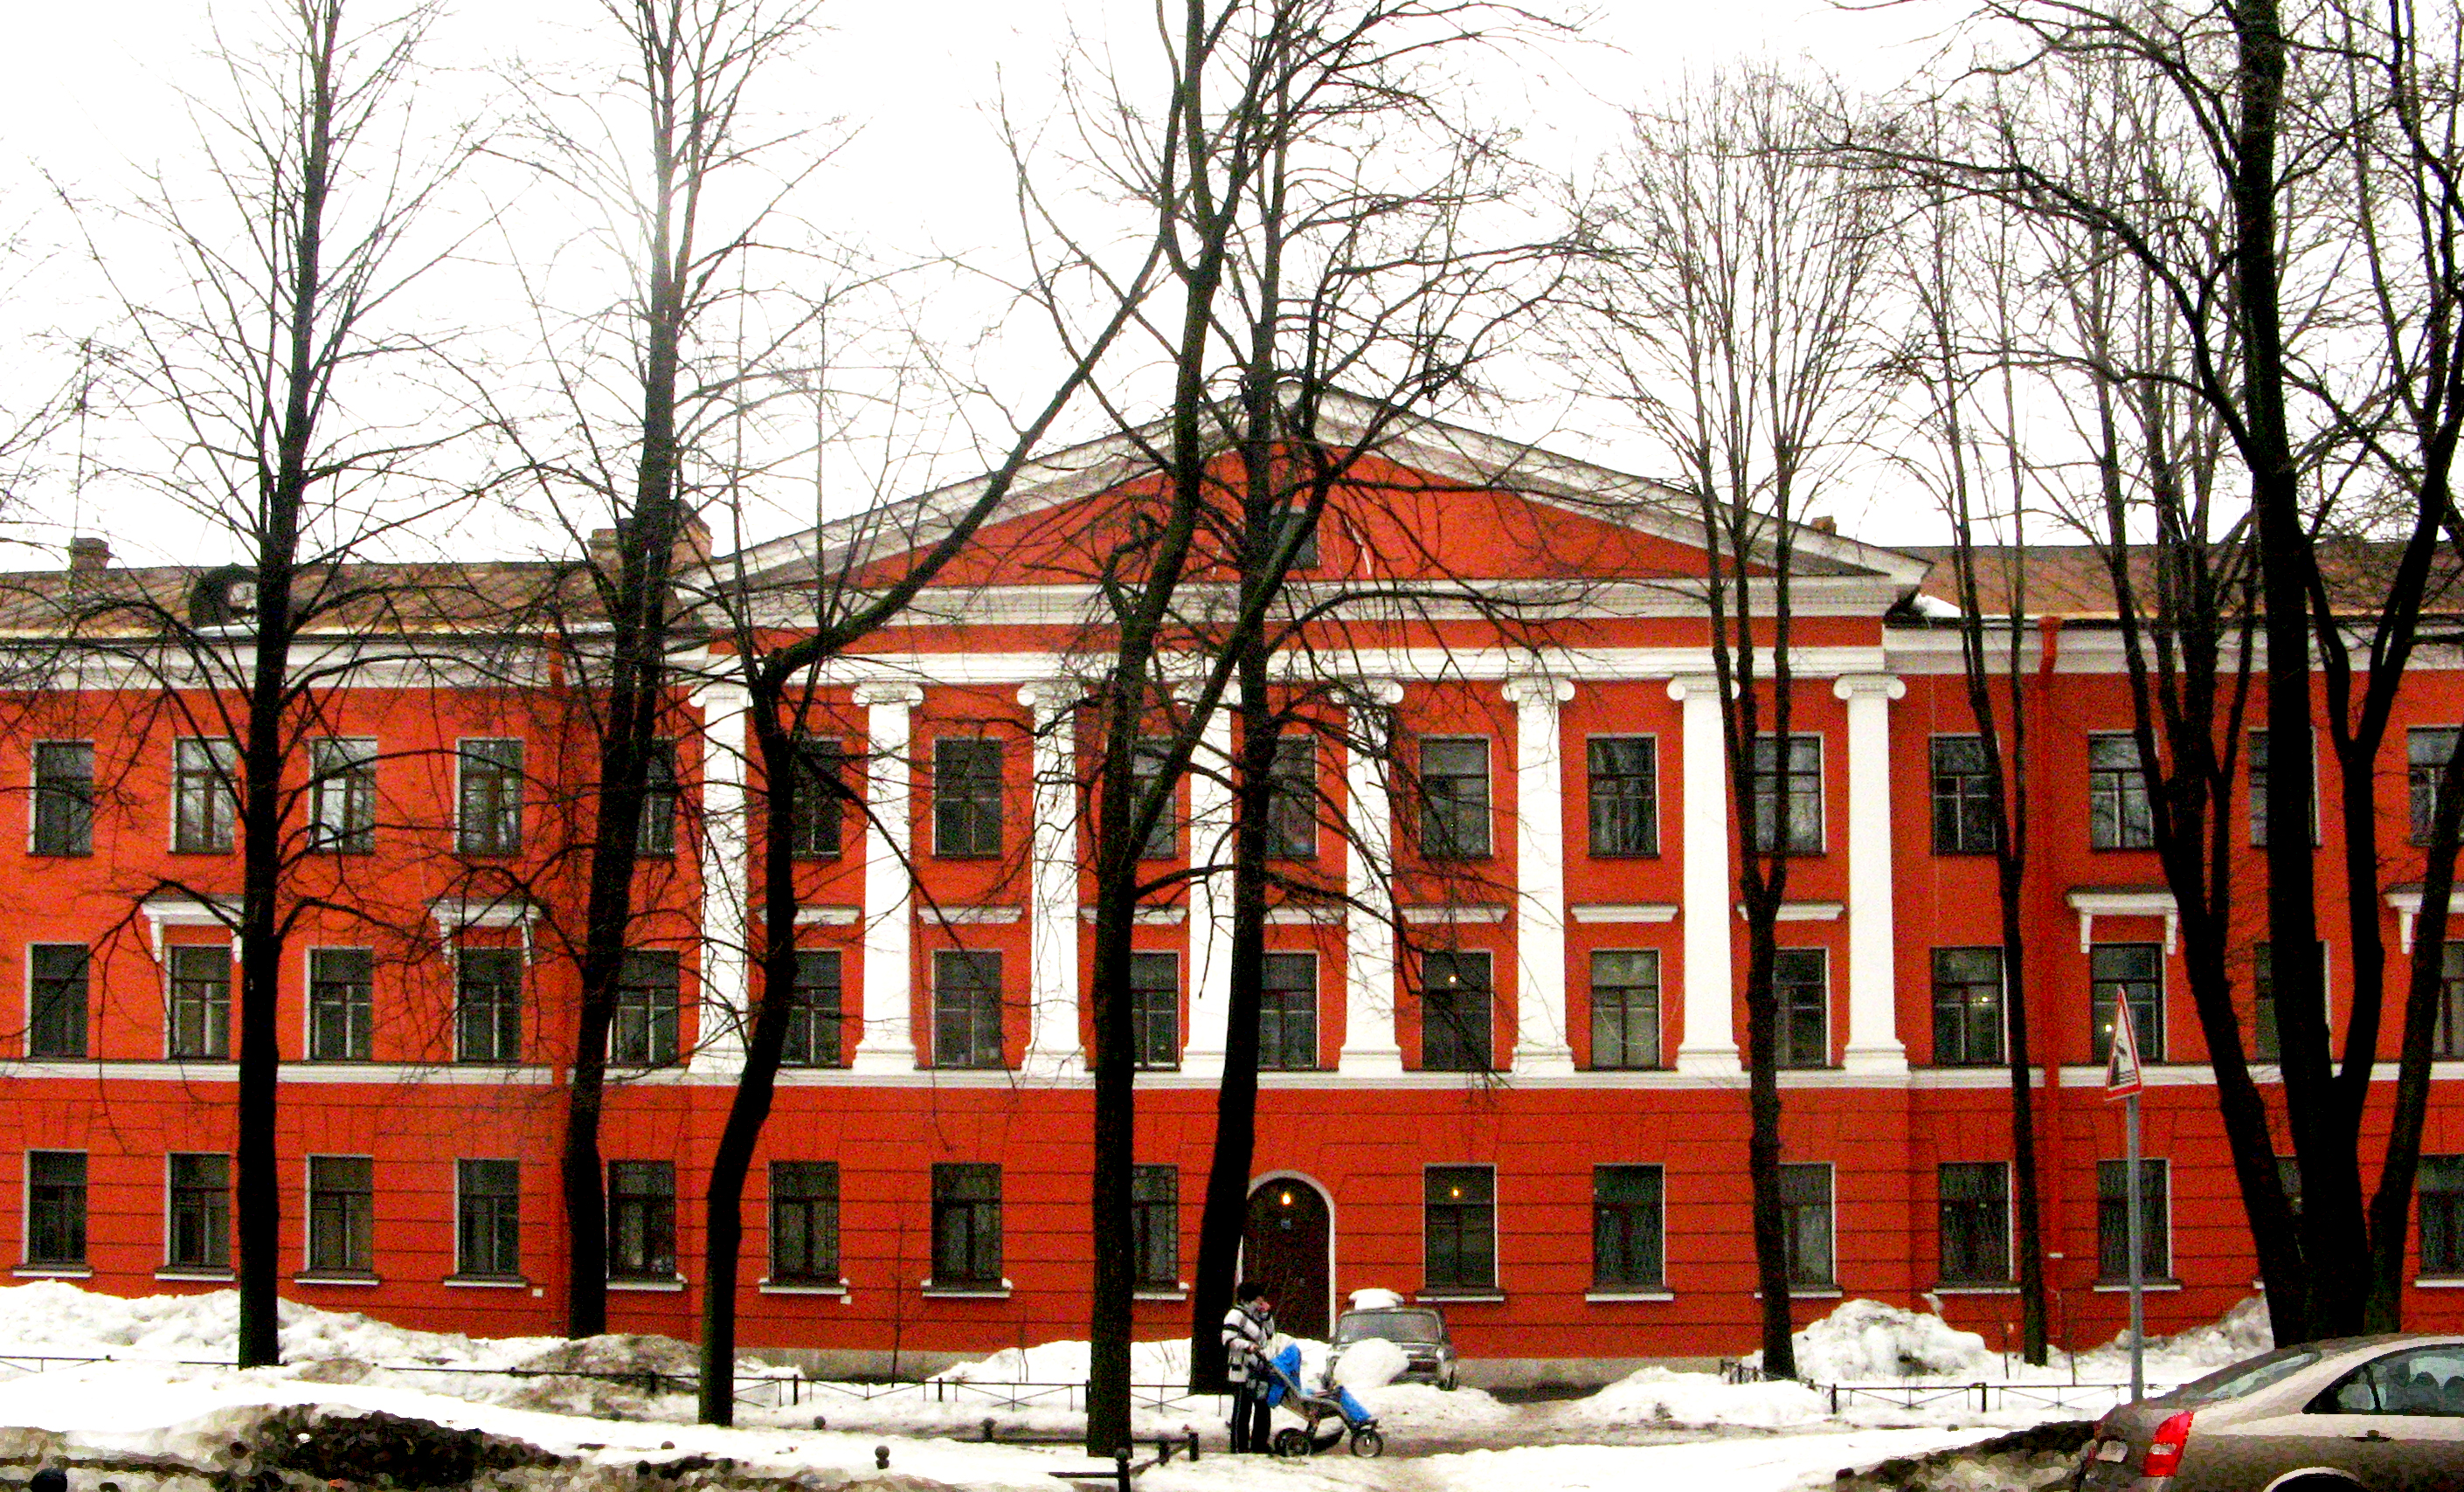 File:Red-white building 1 at 20 Linia V O.jpg - Wikimedia Commons